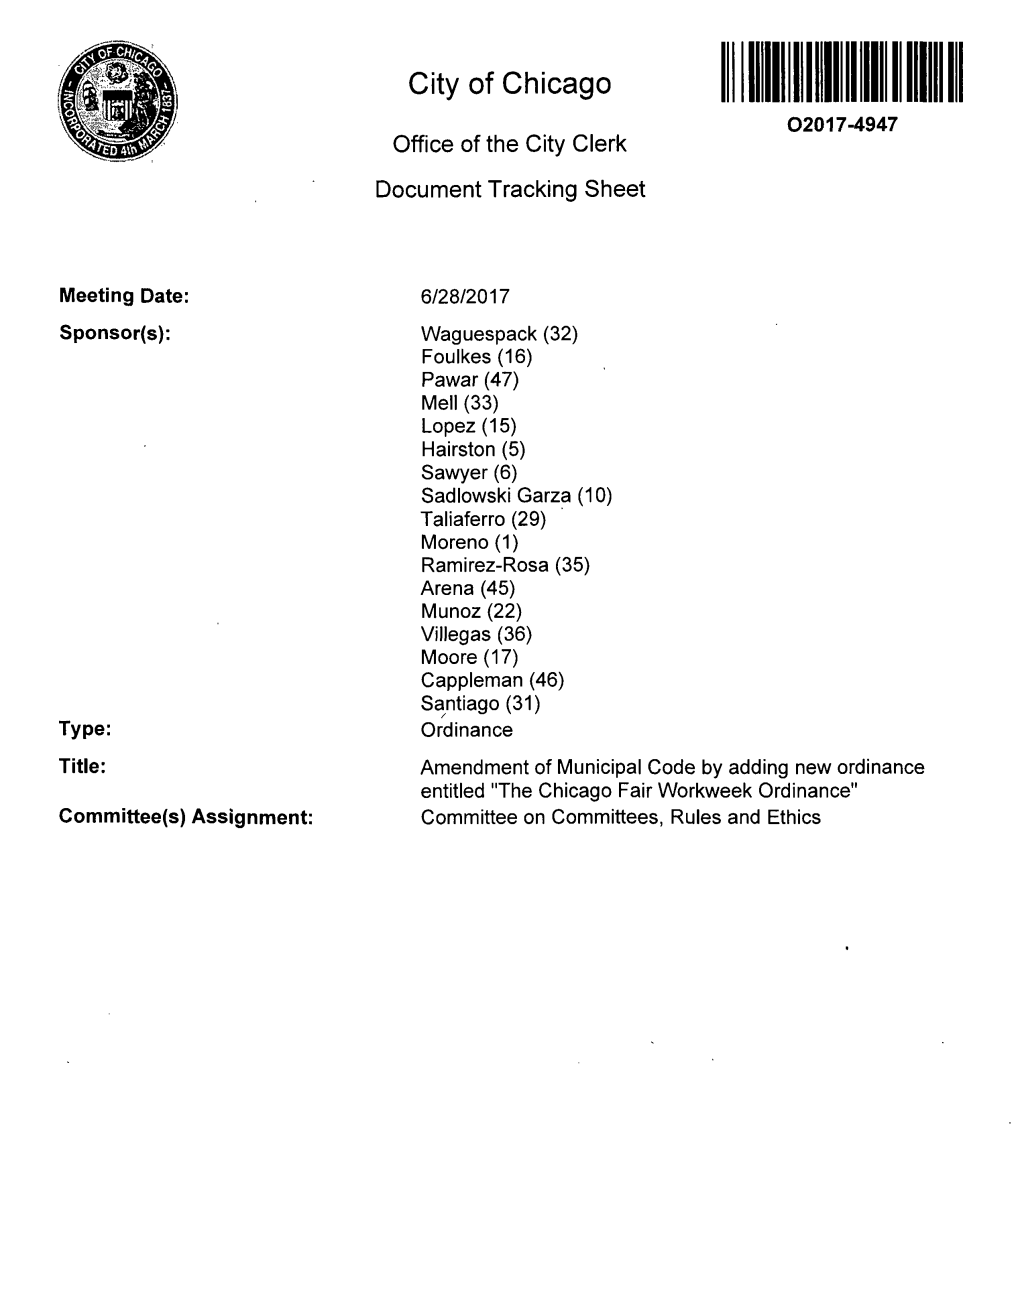 City of Chicago O2017-4947 Office of the City Clerk Document Tracking Sheet